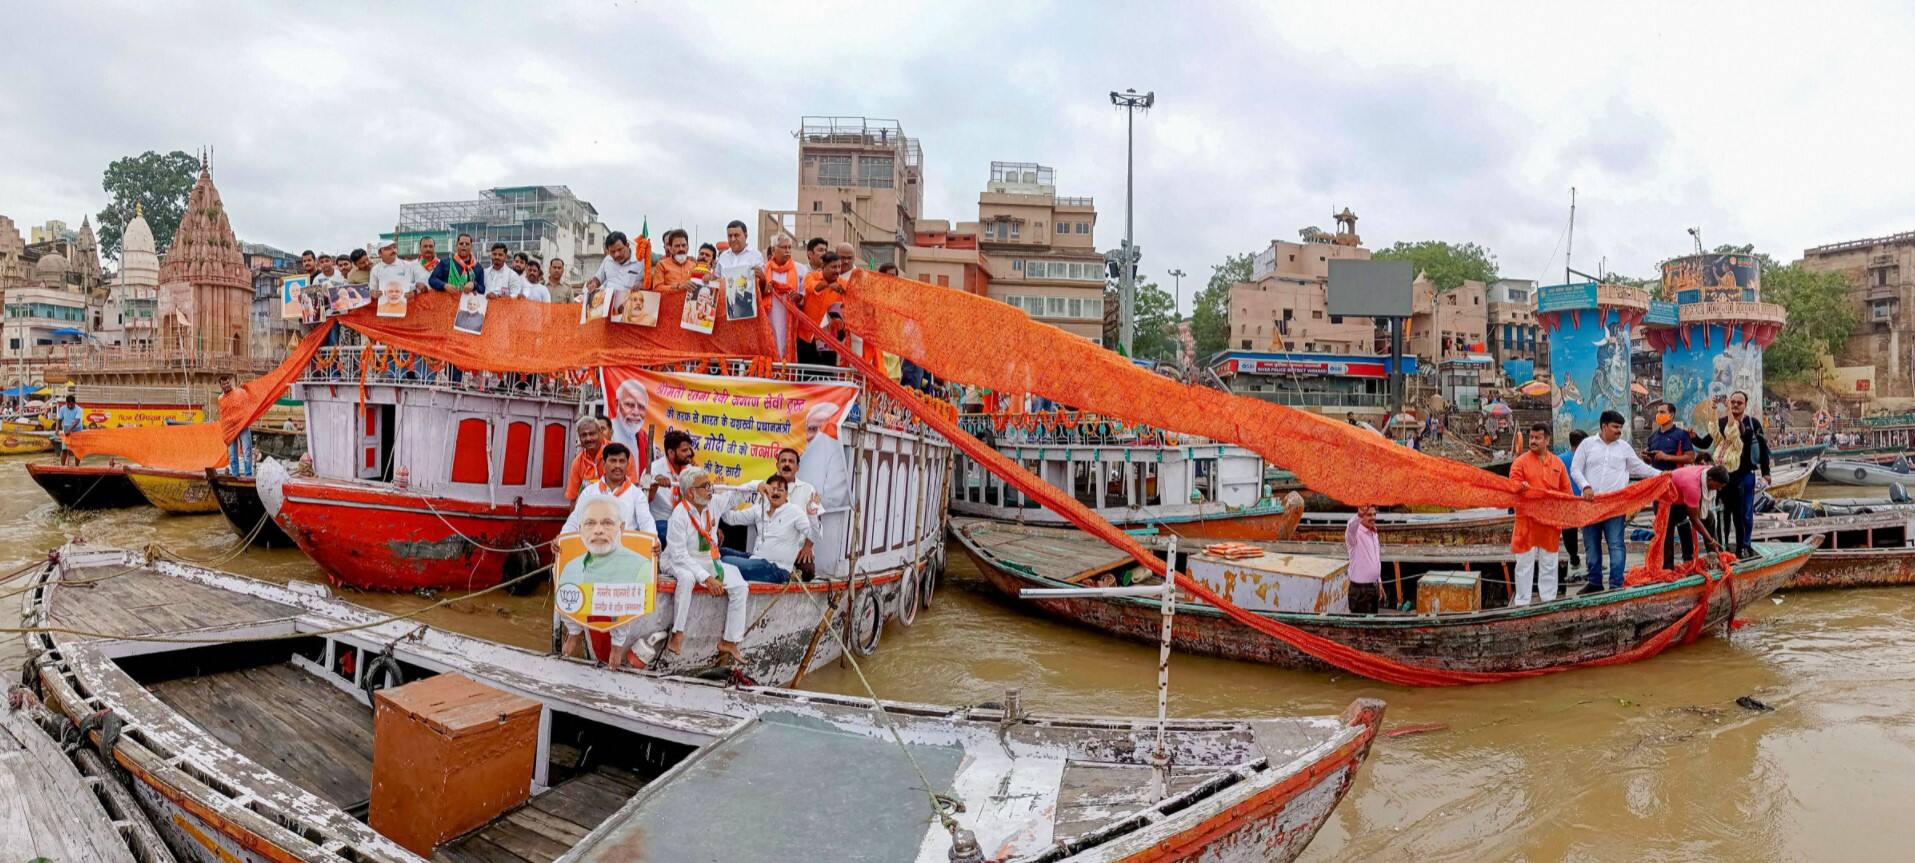 BJP supporters hold a 71-metre saree on the banks of Ganga